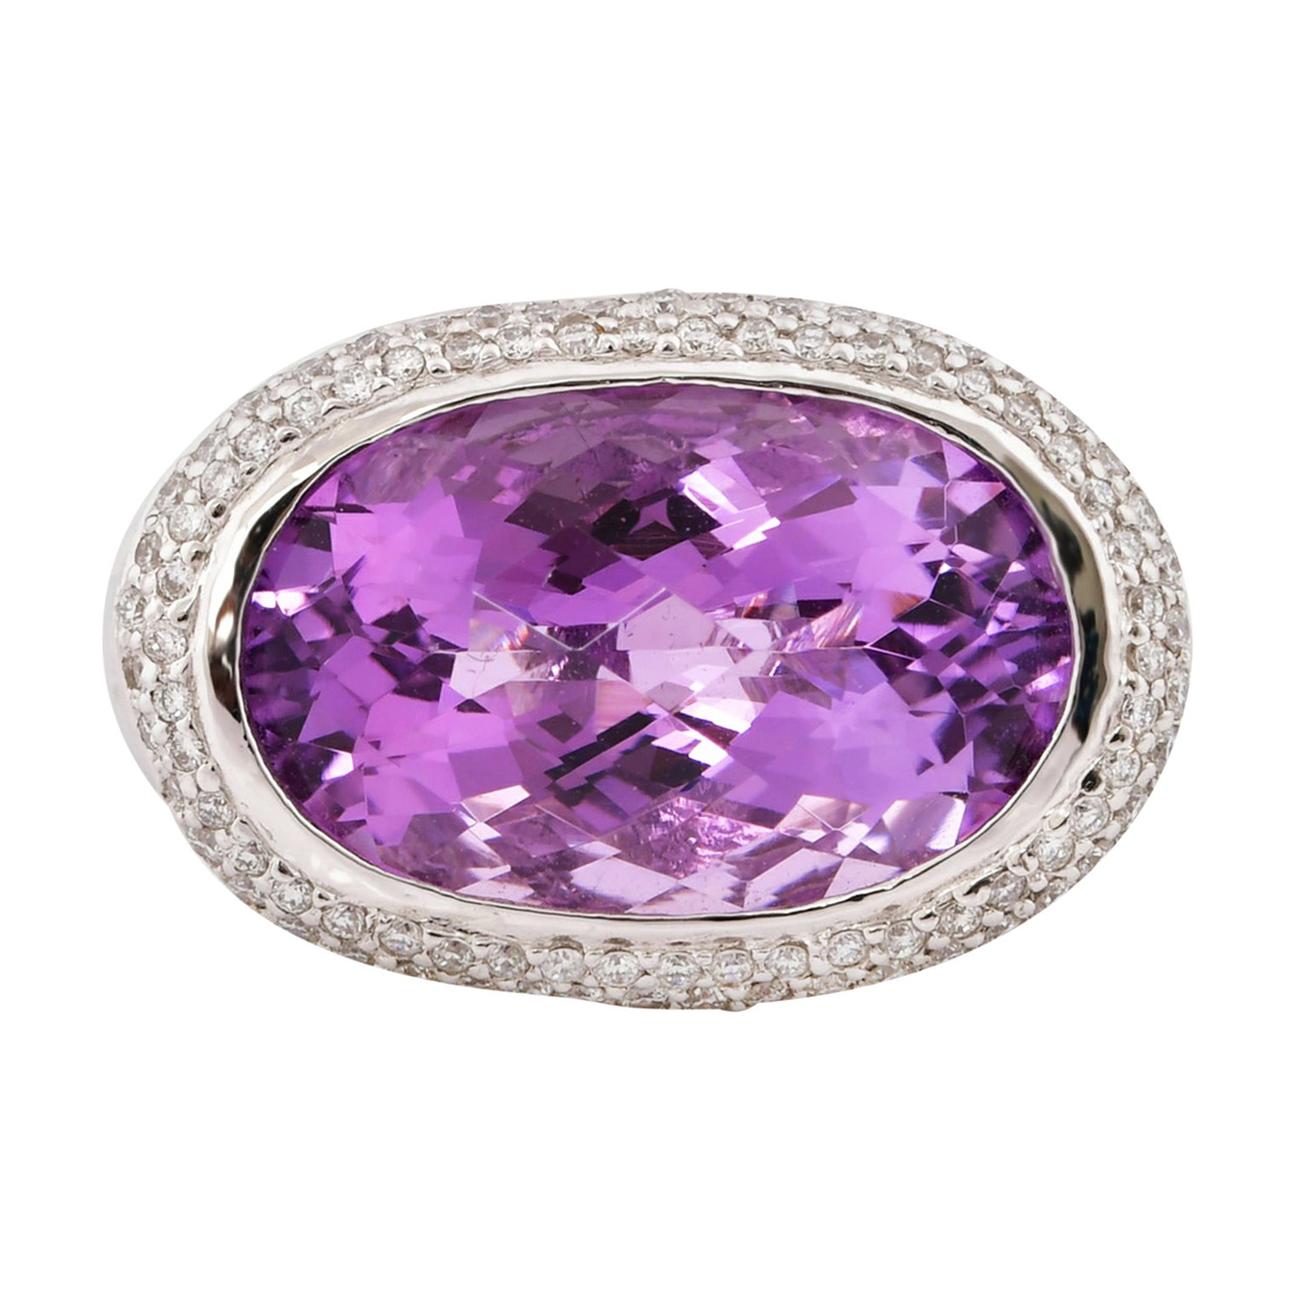 7.6 Carat Amethyst and Diamond Ring in 14 Karat White Gold For Sale